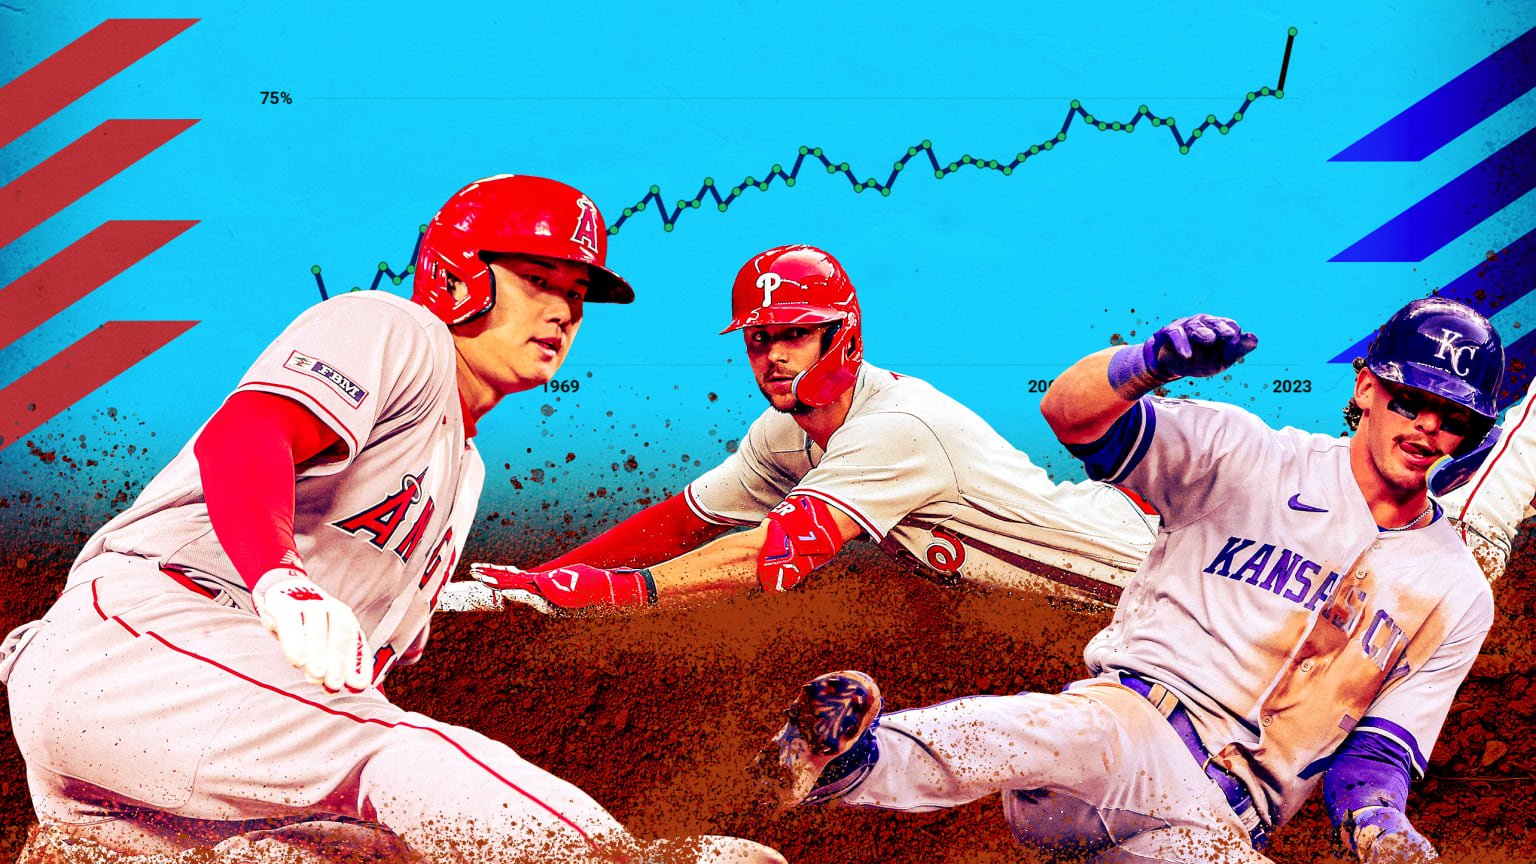 A photo illustration showing three players sliding into bases in front of a chart showing an upward trend